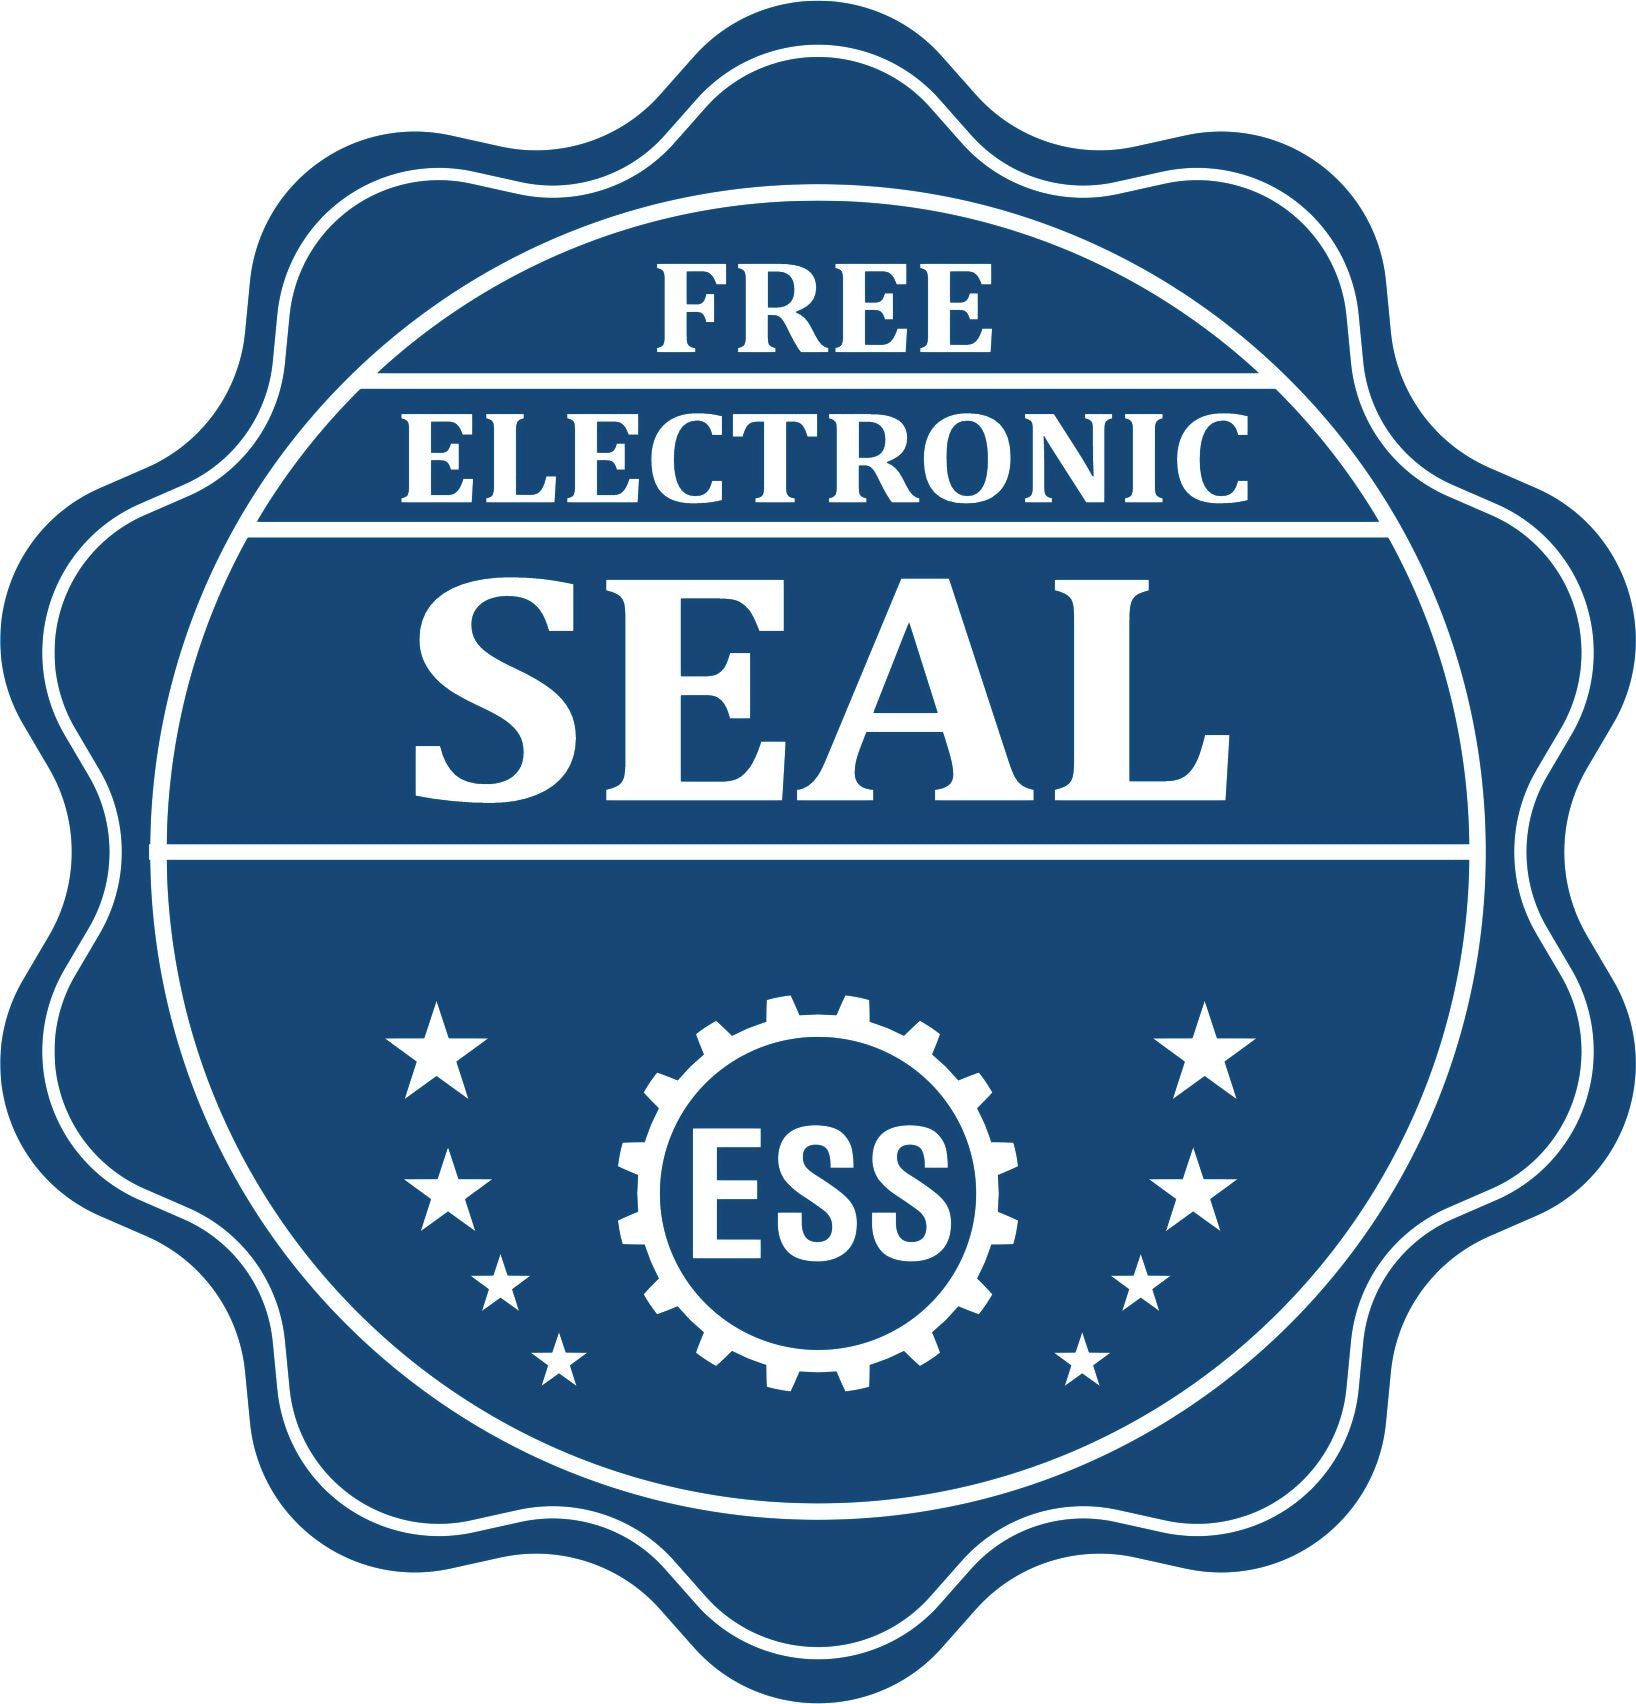 A badge showing a free electronic seal for the Long Reach Massachusetts Geology Seal with stars and the ESS gear on the emblem.